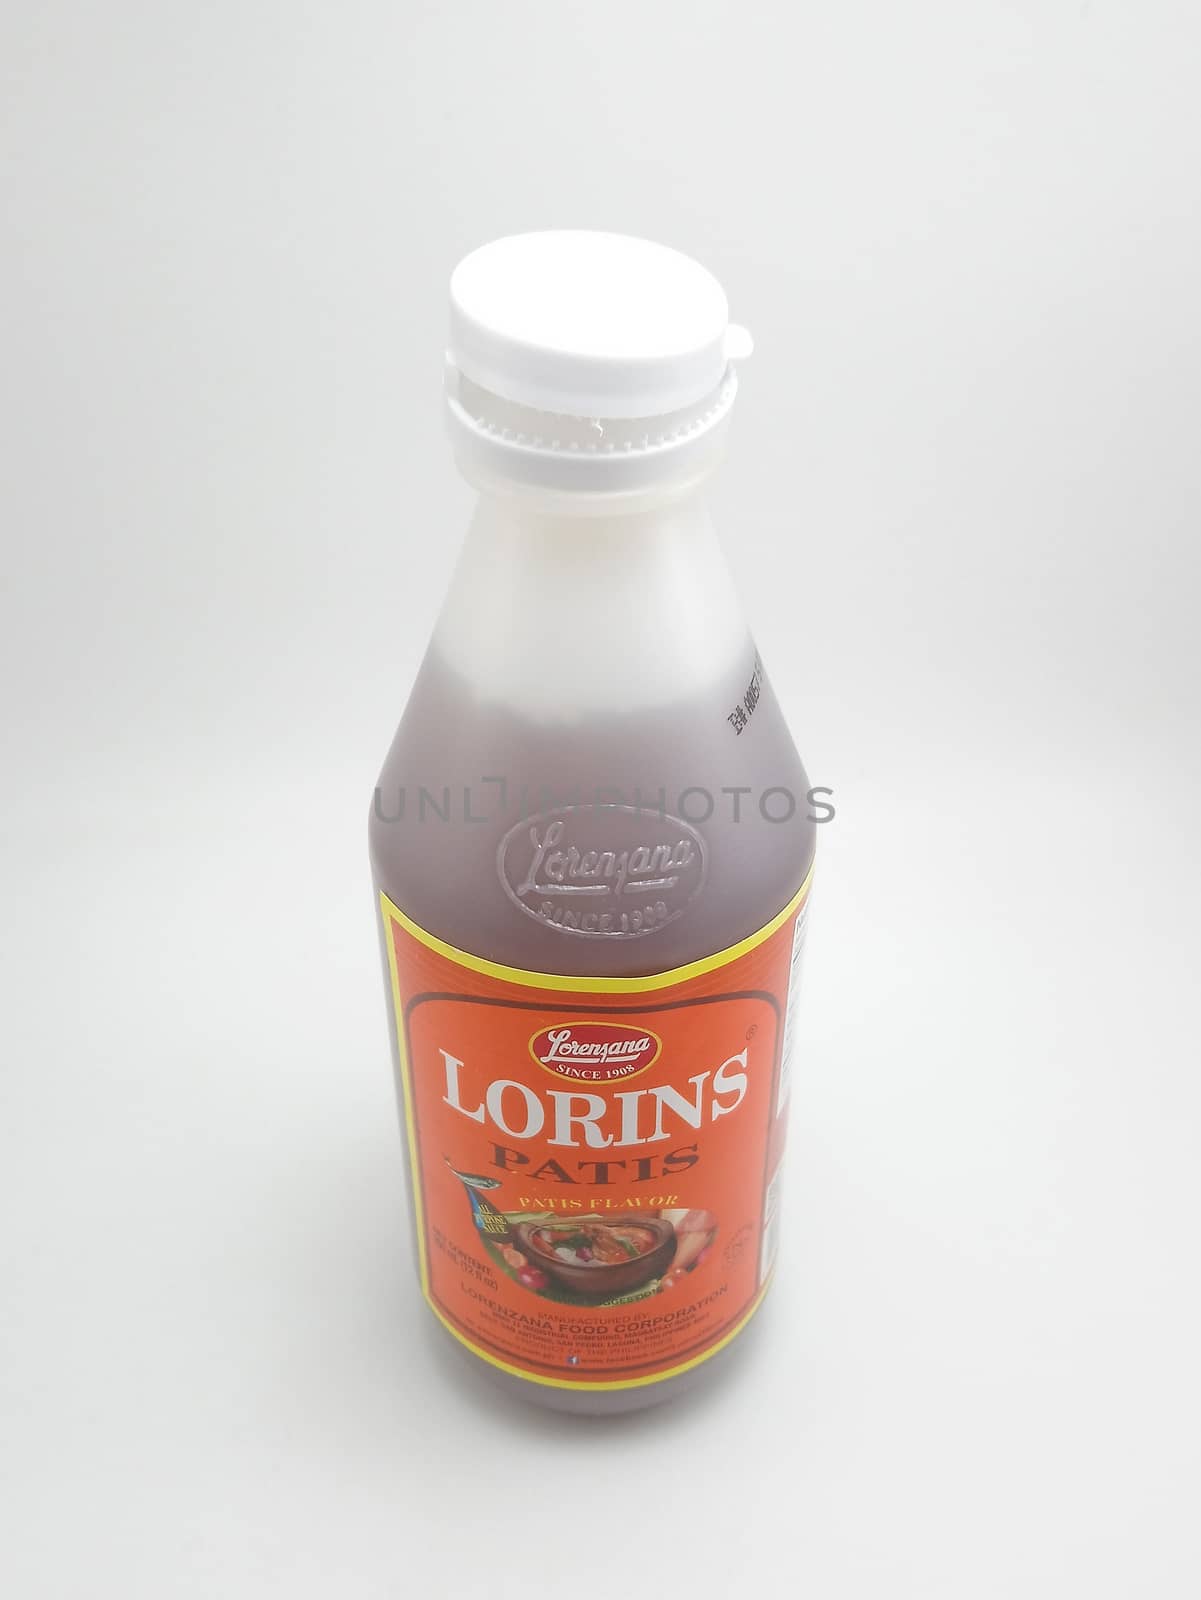 Lorins patis fish sauce bottle in Manila, Philippines by imwaltersy